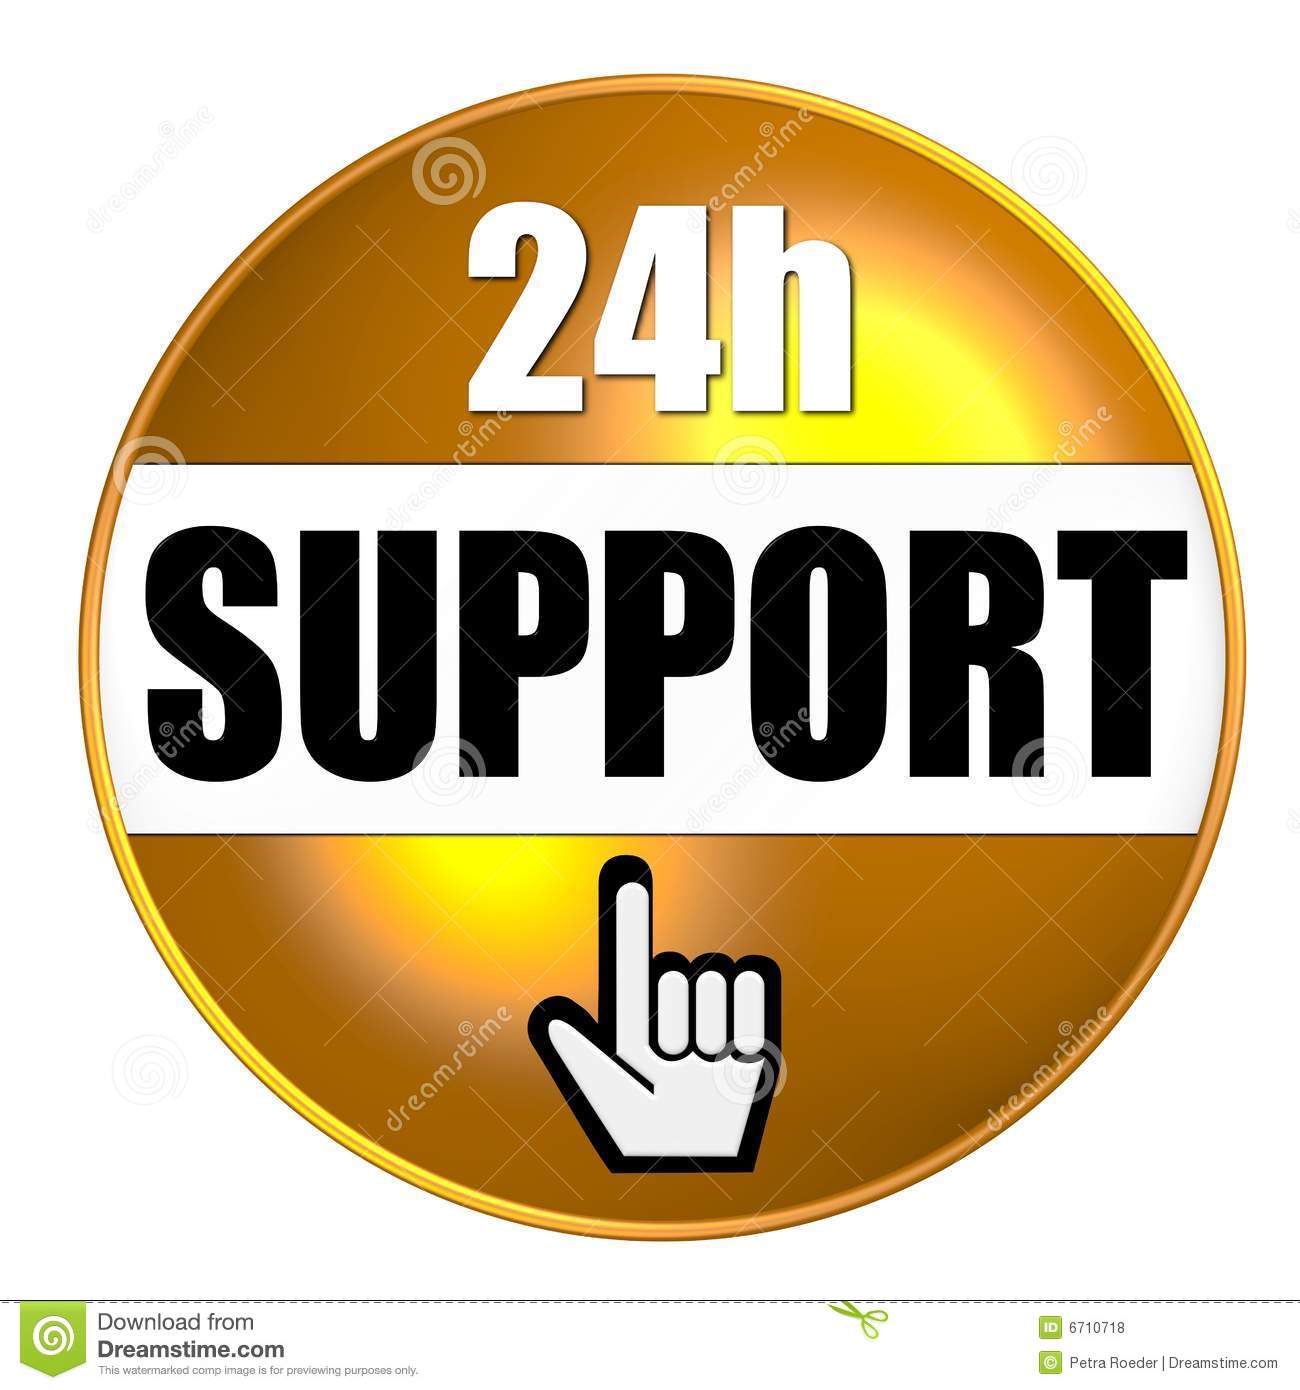 24 Hour Support Graphic Royalty Free Stock Photos   Image  6710718